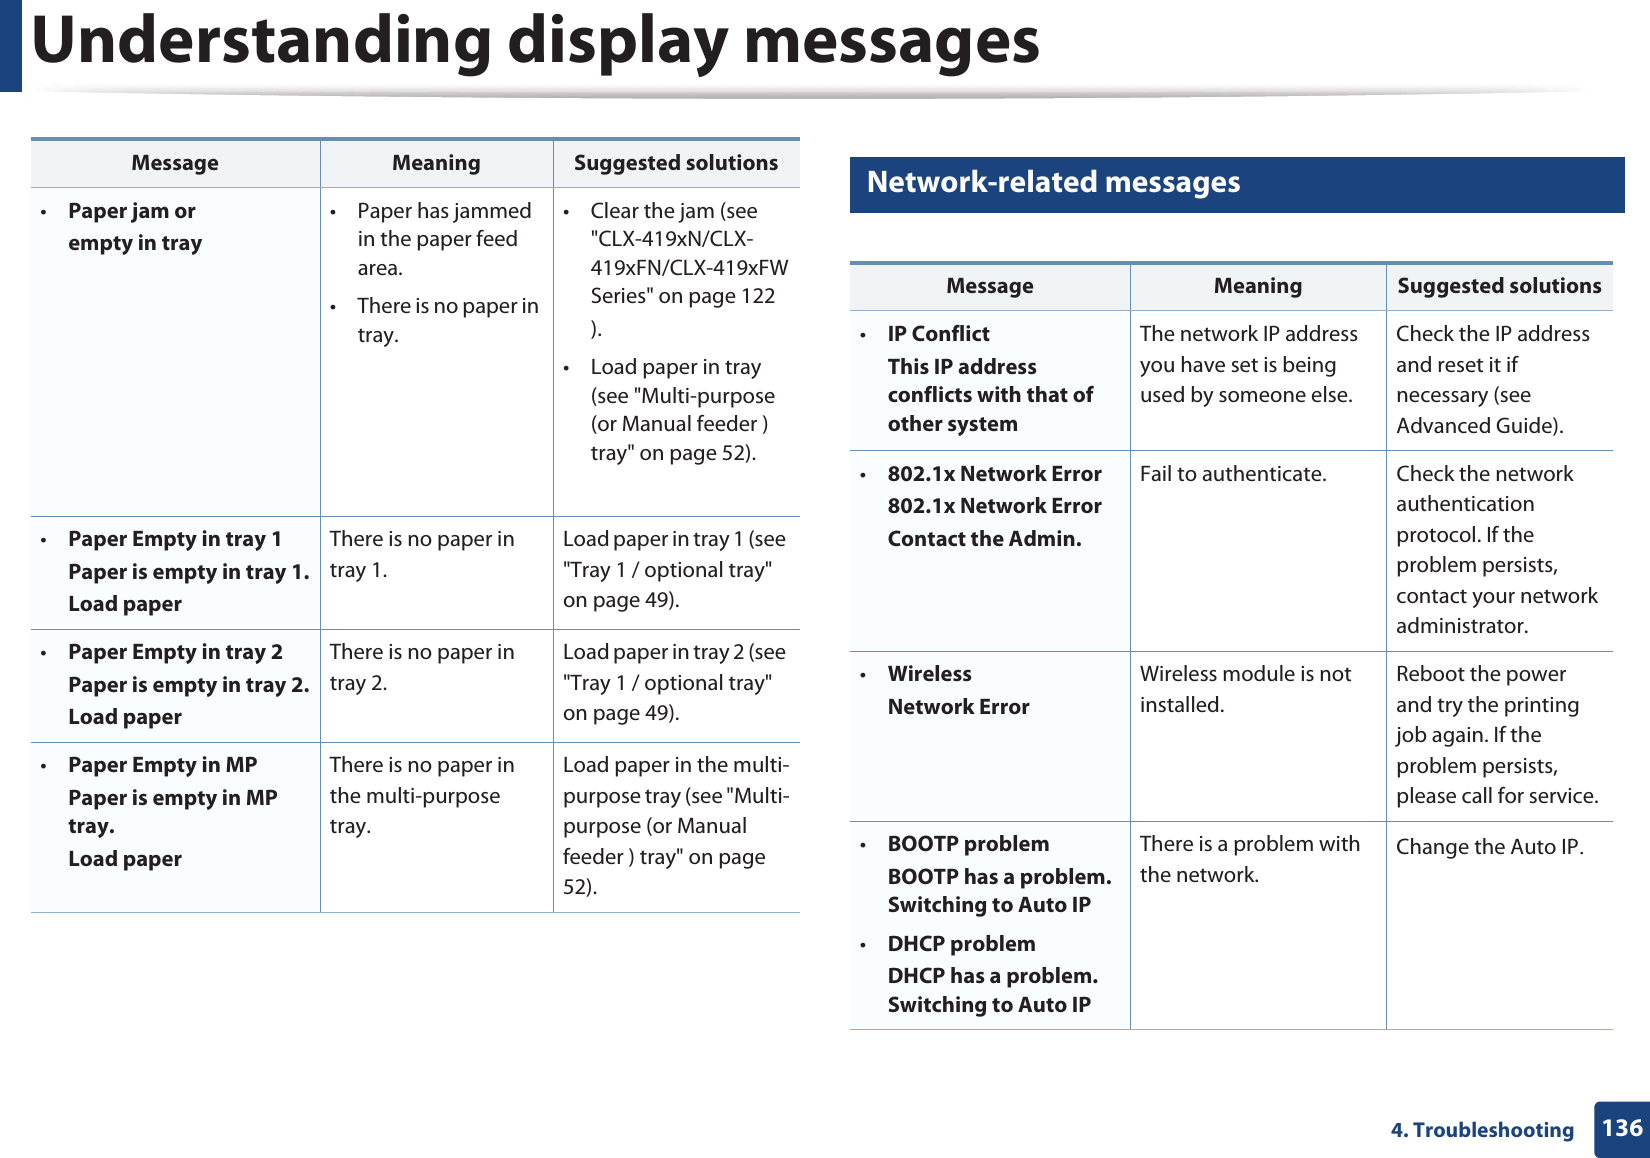 Understanding display messages1364. Troubleshooting14 Network-related messages•Paper jam orempty in tray• Paper has jammed in the paper feed area.• There is no paper in tray.• Clear the jam (see &quot;CLX-419xN/CLX-419xFN/CLX-419xFW Series&quot; on page 122).• Load paper in tray (see &quot;Multi-purpose (or Manual feeder ) tray&quot; on page 52).•Paper Empty in tray 1Paper is empty in tray 1.Load paperThere is no paper in tray 1. Load paper in tray 1 (see &quot;Tray 1 / optional tray&quot; on page 49).•Paper Empty in tray 2Paper is empty in tray 2.Load paperThere is no paper in tray 2. Load paper in tray 2 (see &quot;Tray 1 / optional tray&quot; on page 49).•Paper Empty in MPPaper is empty in MP tray.Load paperThere is no paper in the multi-purpose tray. Load paper in the multi-purpose tray (see &quot;Multi-purpose (or Manual feeder ) tray&quot; on page 52).Message Meaning Suggested solutionsMessage Meaning Suggested solutions•IP ConflictThis IP address conflicts with that of other systemThe network IP address you have set is being used by someone else. Check the IP address and reset it if necessary (see Advanced Guide).•802.1x Network Error802.1x Network ErrorContact the Admin.Fail to authenticate. Check the network authentication protocol. If the problem persists, contact your network administrator.•Wireless Network ErrorWireless module is not installed.Reboot the power and try the printing job again. If the problem persists, please call for service. •BOOTP problemBOOTP has a problem. Switching to Auto IP•DHCP problemDHCP has a problem. Switching to Auto IPThere is a problem with the network.Change the Auto IPU